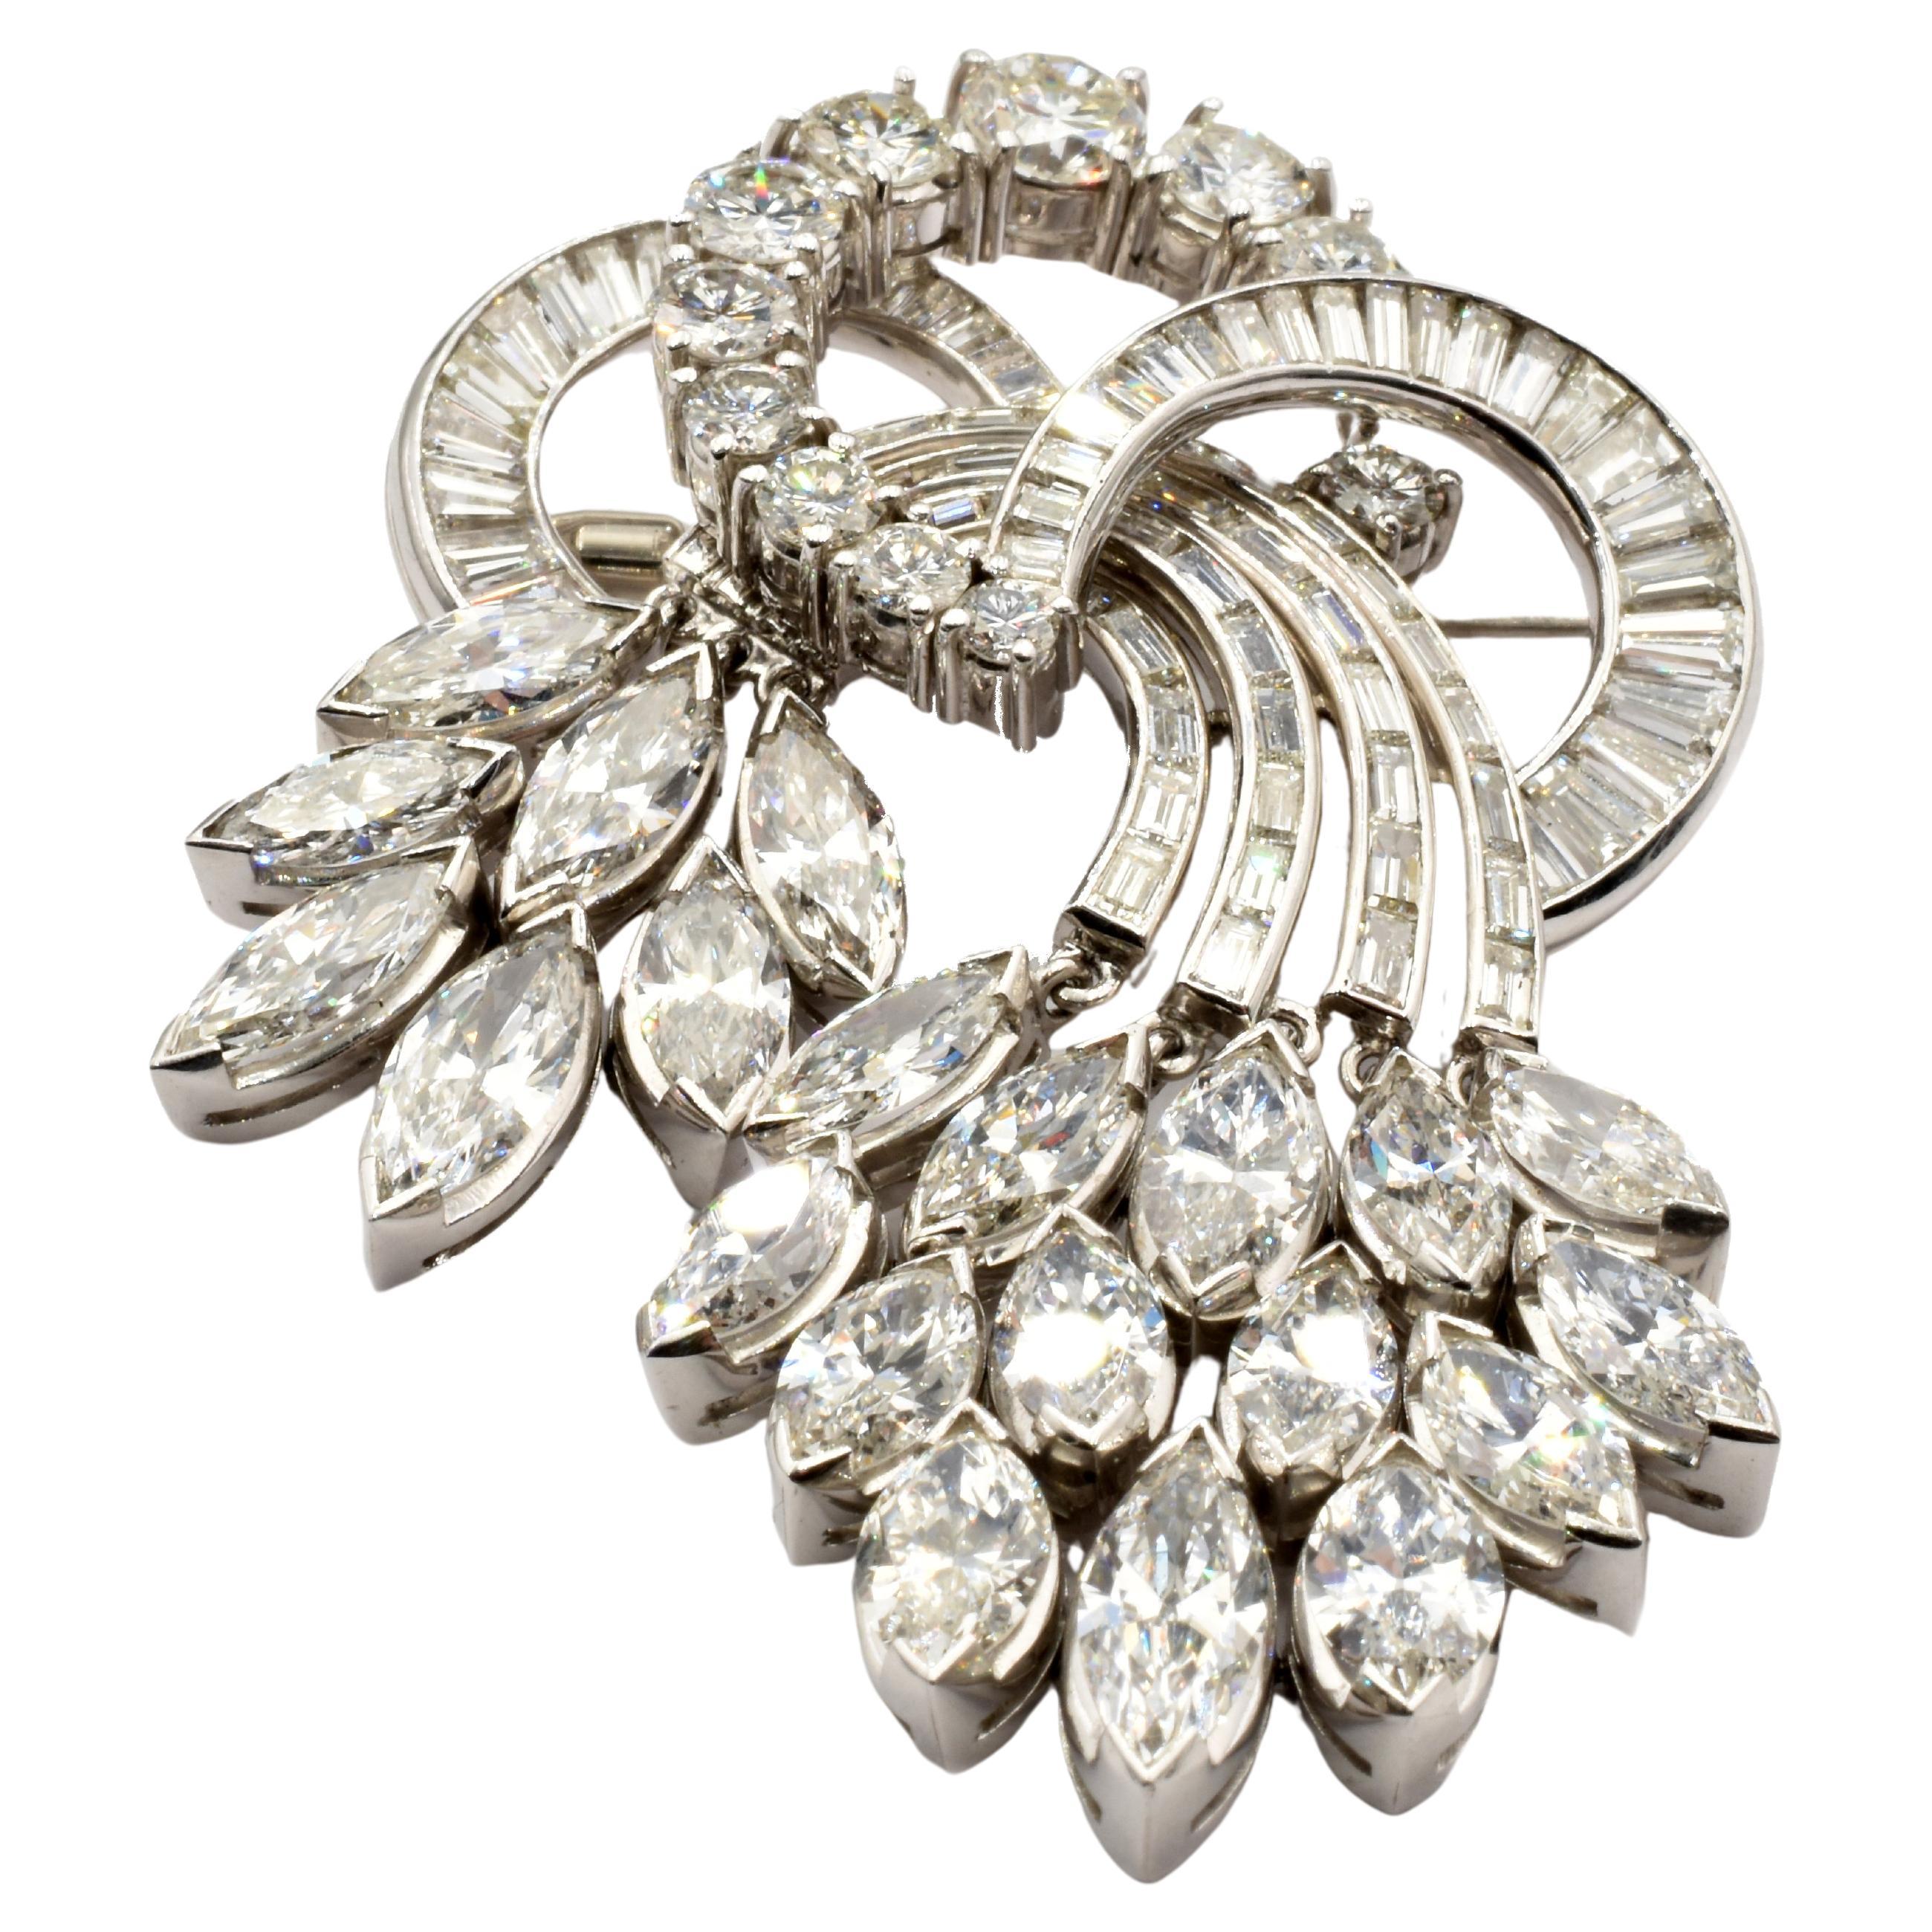 Gilberto Cassola Marquise, Round Cut Diamonds White Gold Brooch and Pendant 